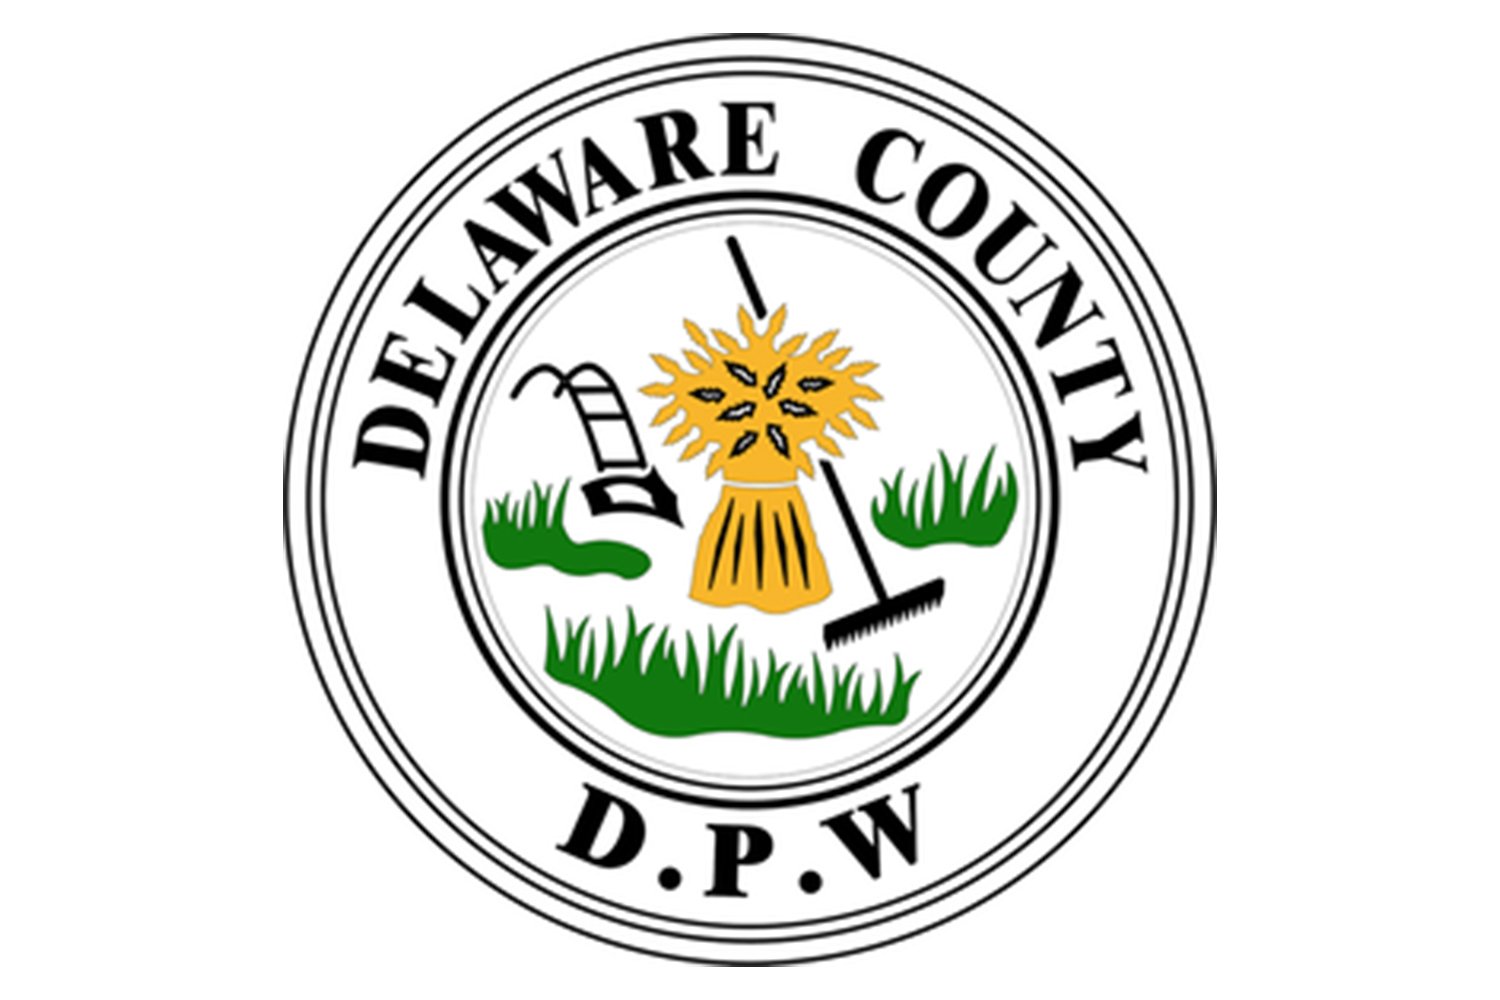 Delaware County Department of Public Works